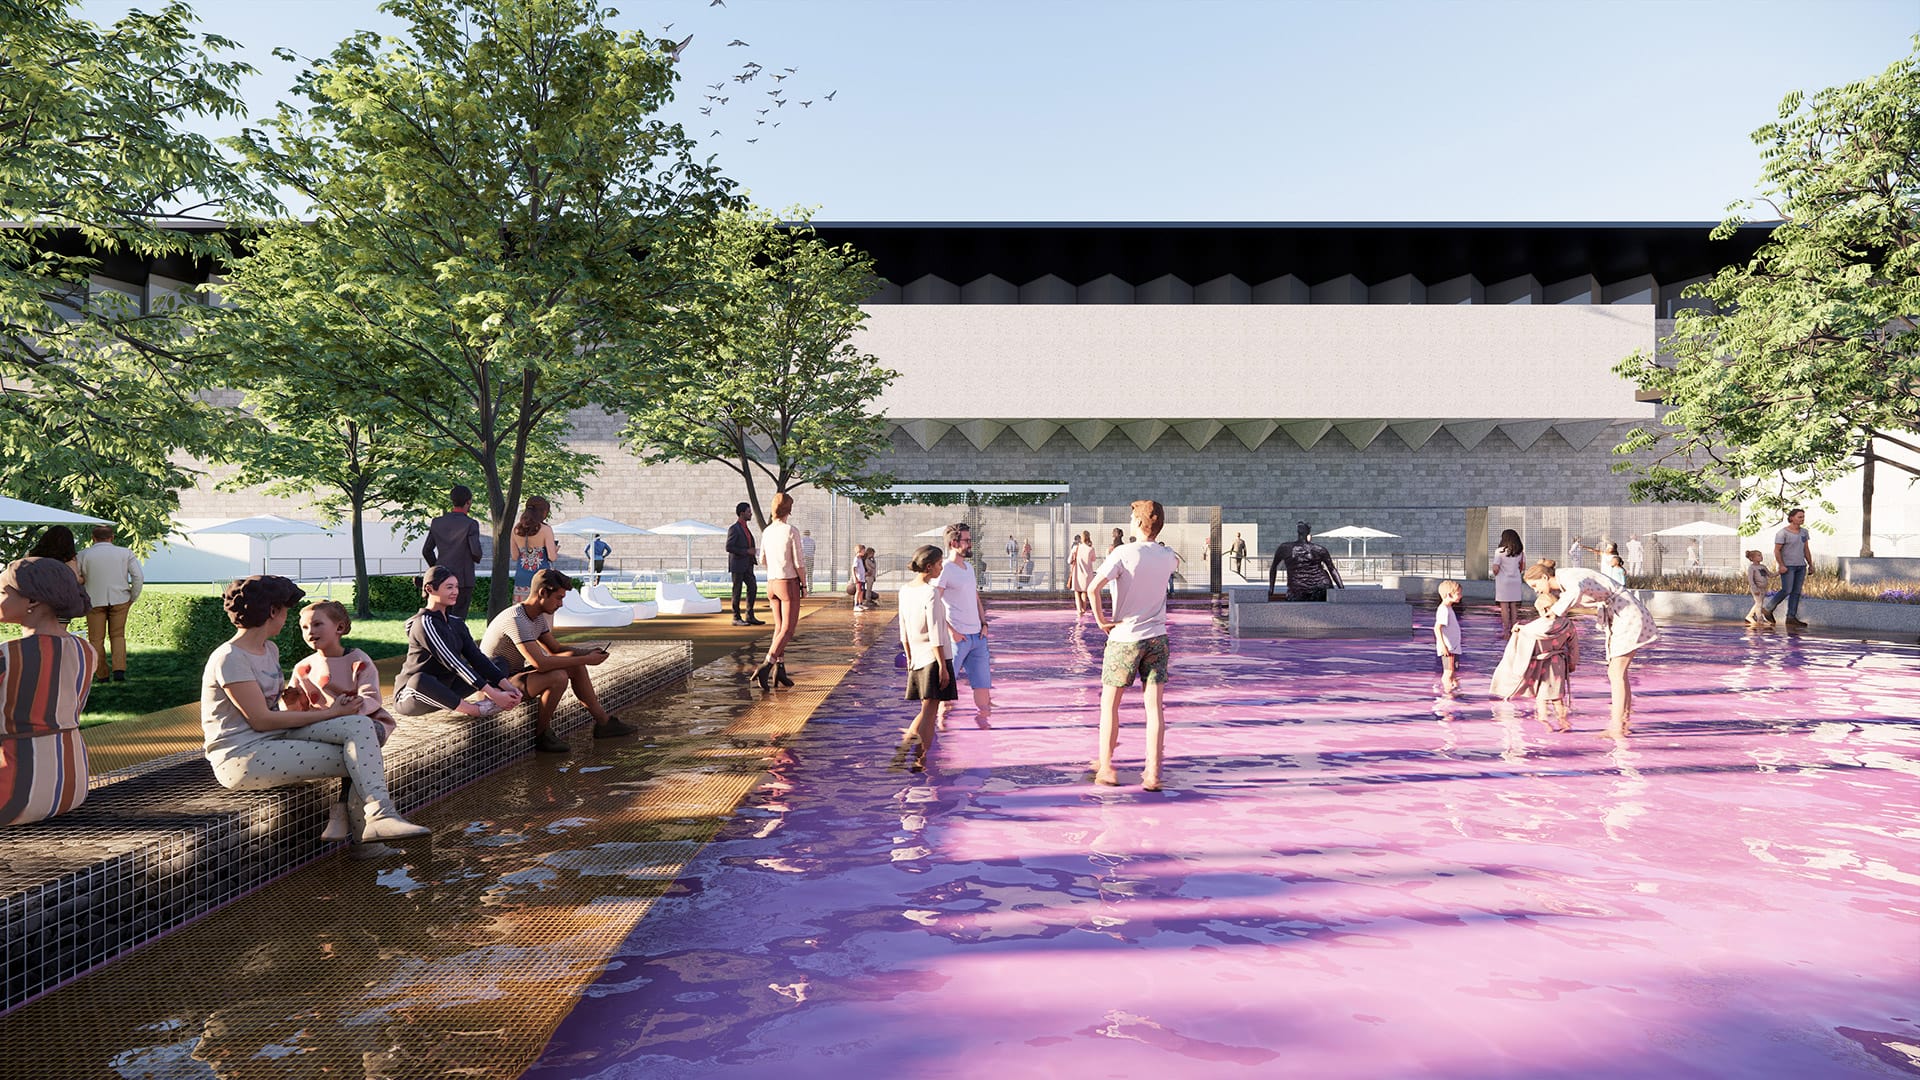 2021 NGV Architecture Commission | Pond[er]. Image: Courtesy Taylor Knights and James Carey